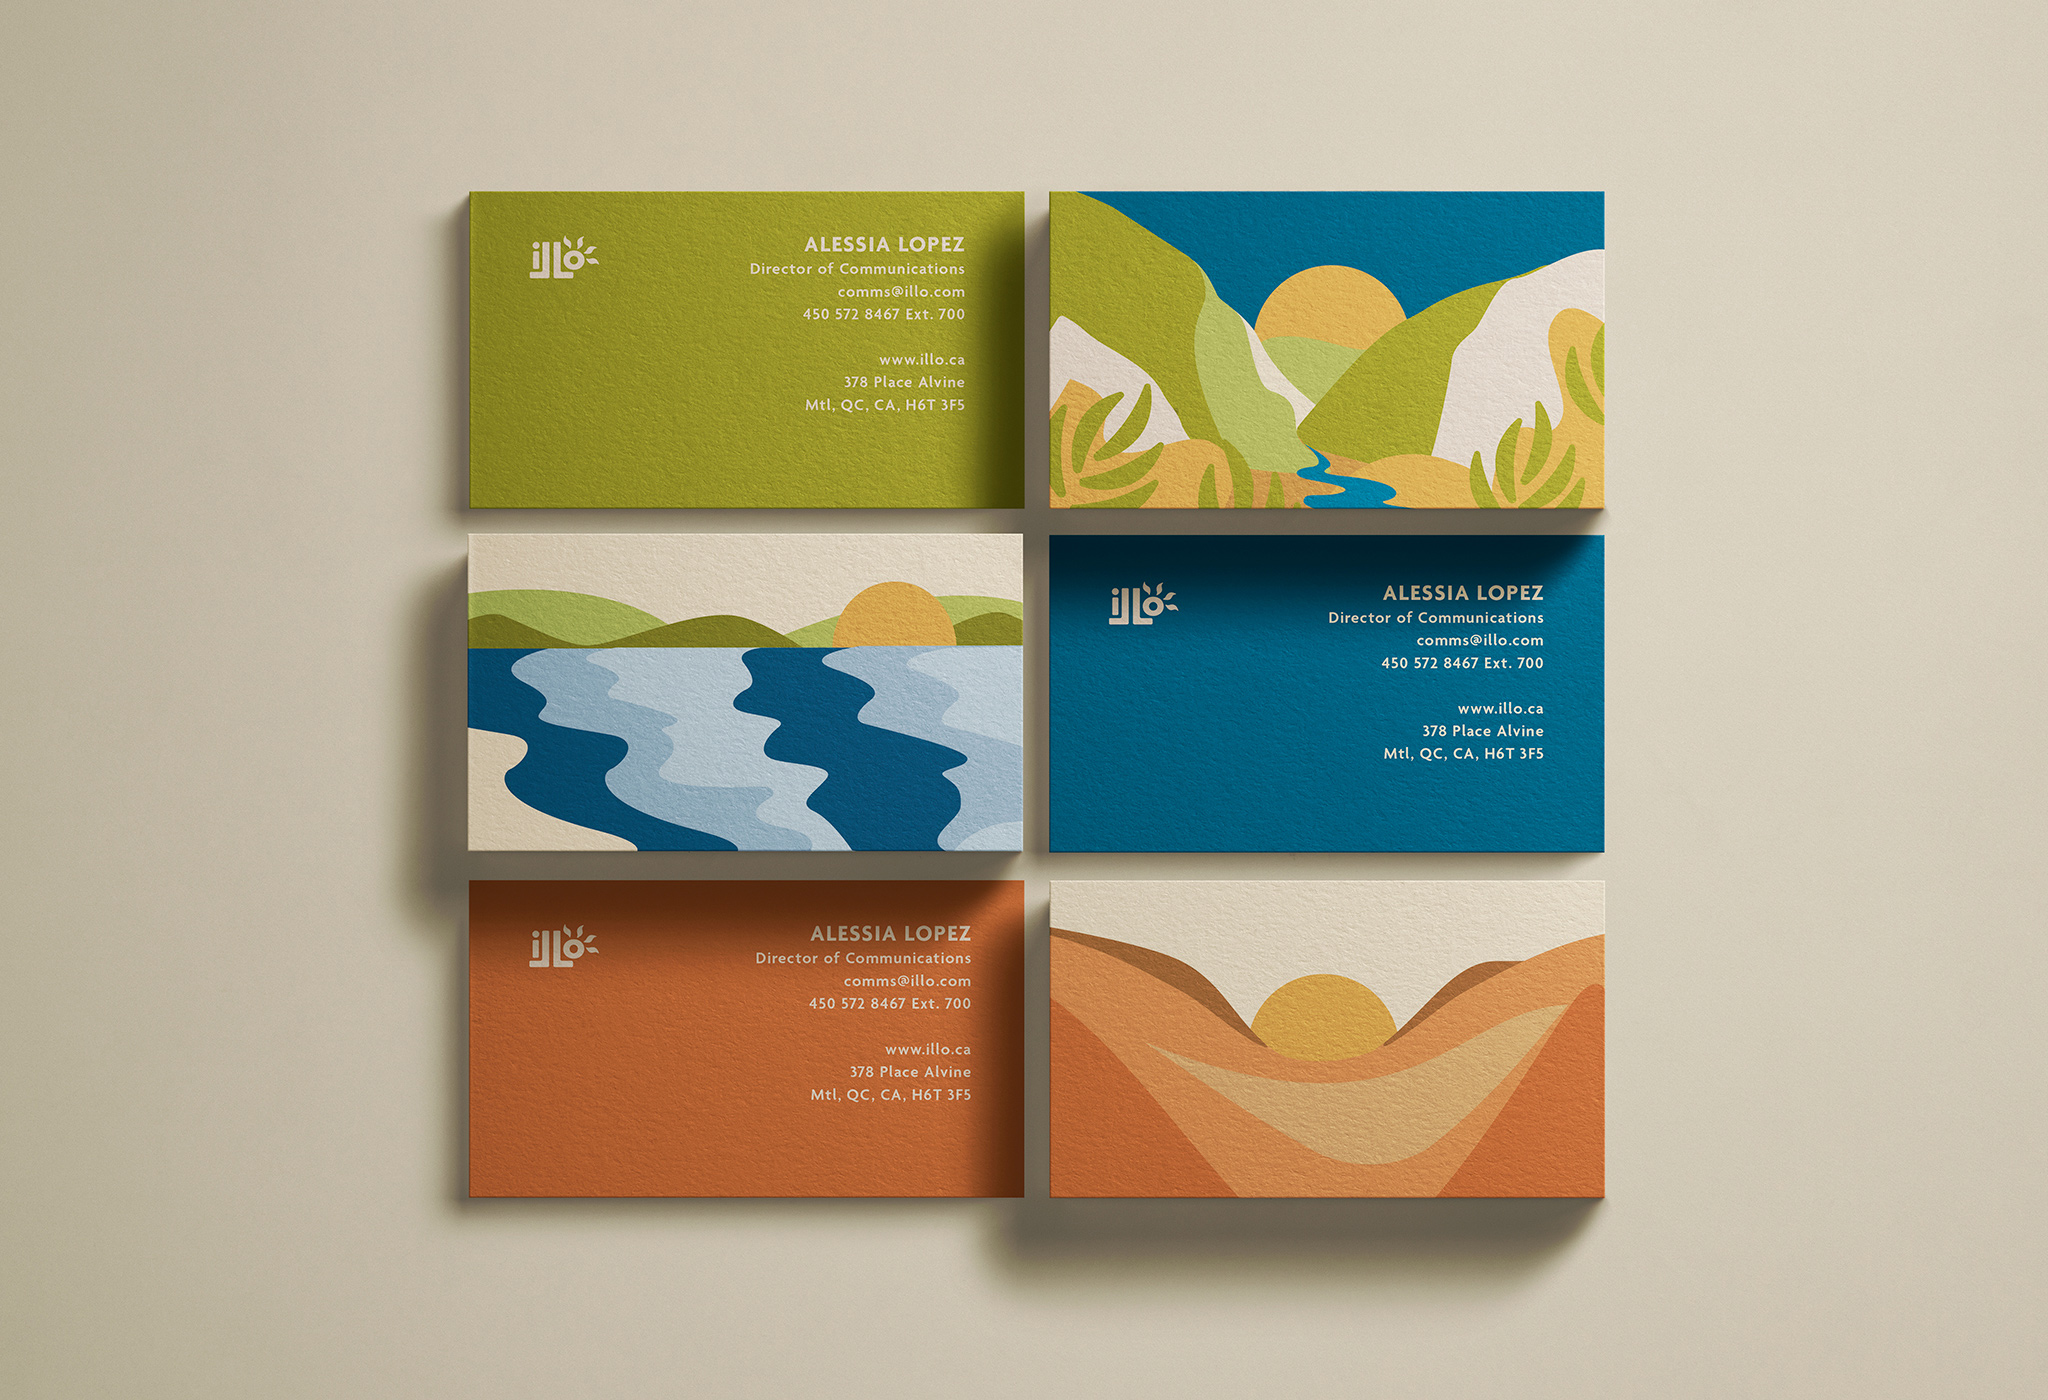 Mockup of printed business cards created for Illo Adventures. There are three variations displayed front and back.